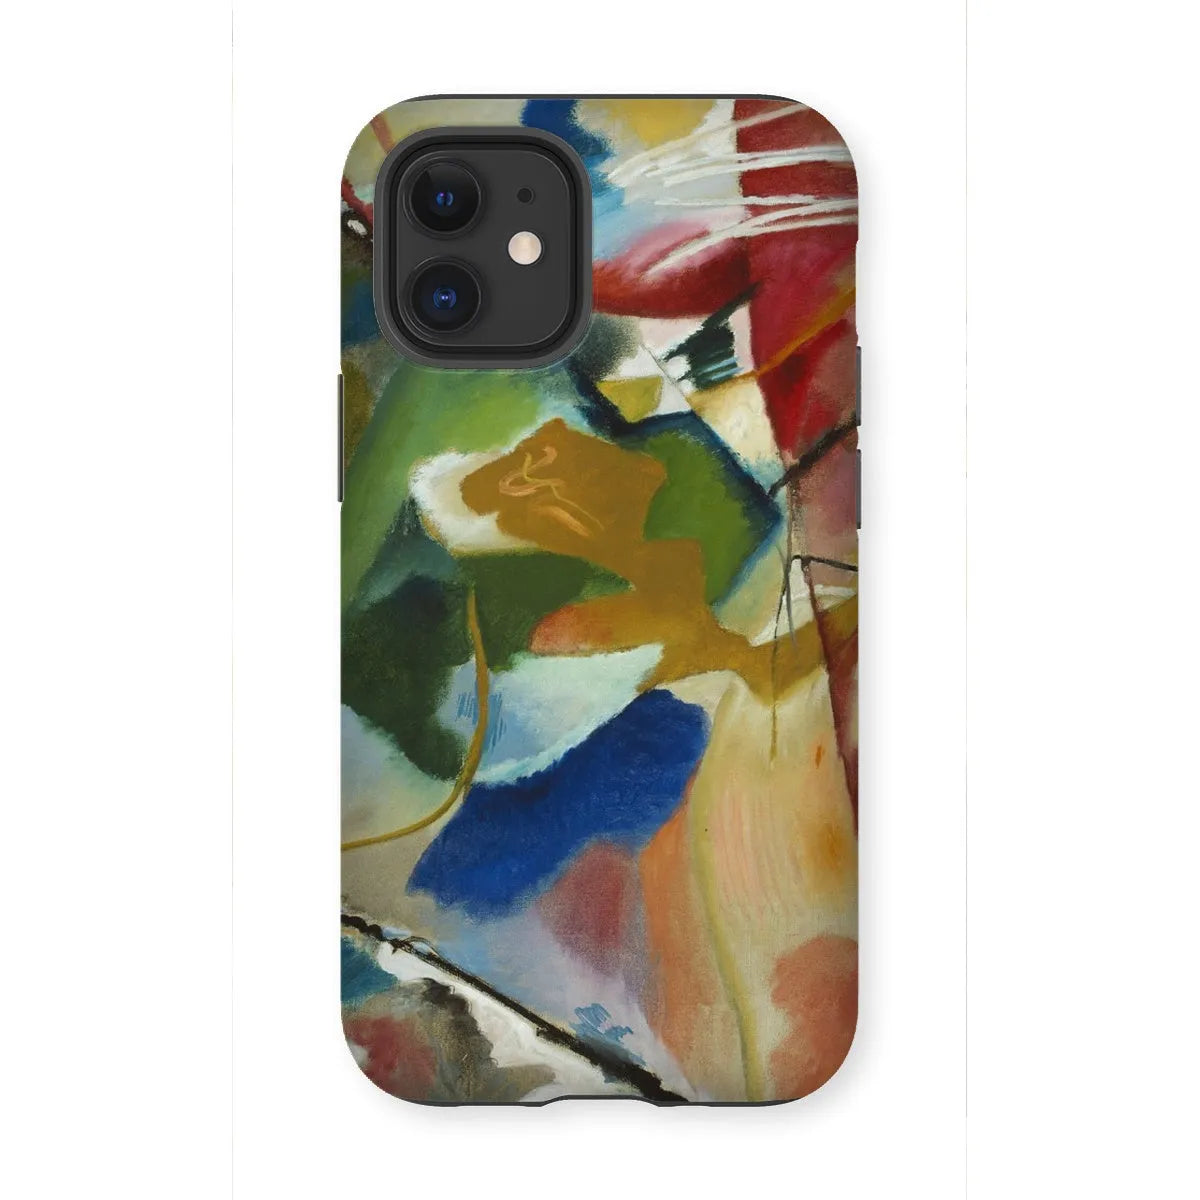 Painting With Green Center Art Phone Case - Wassily Kandinsky - Iphone 12 Mini / Matte - Mobile Phone Cases - Aesthetic